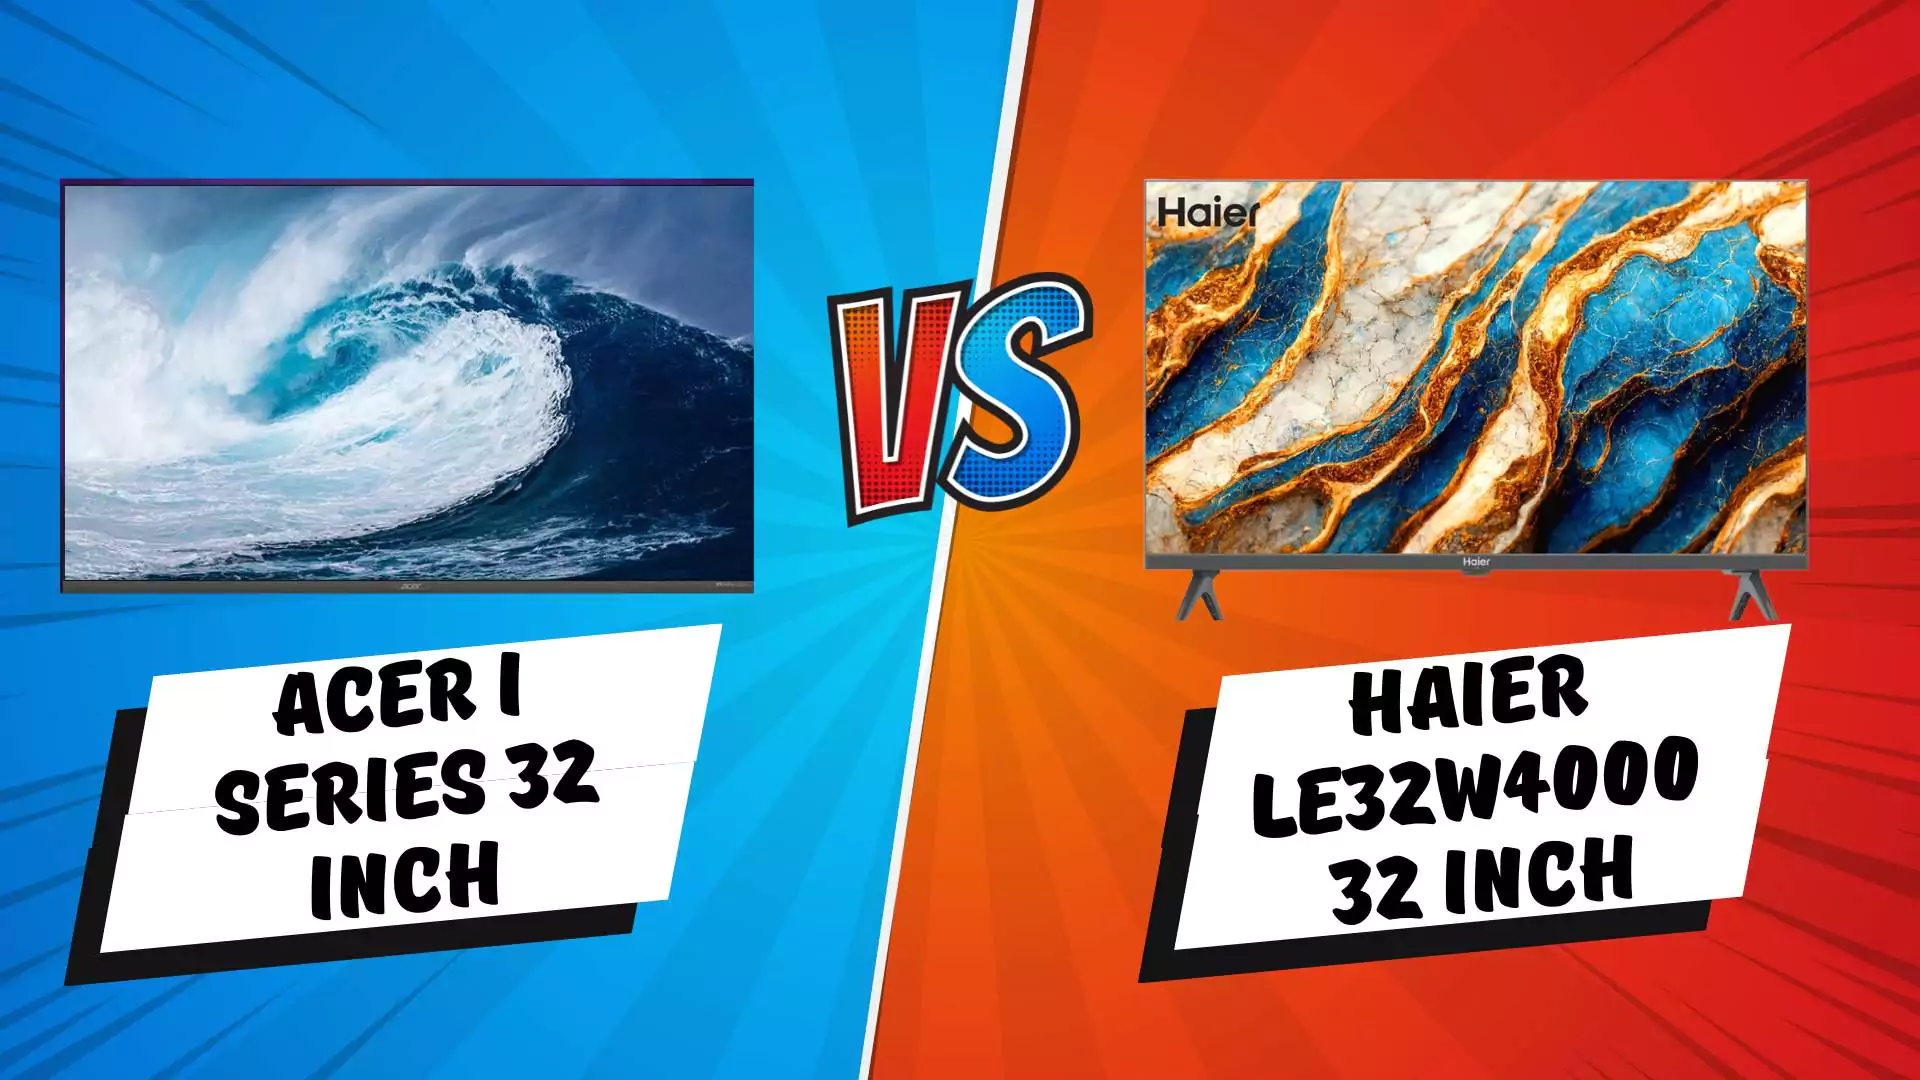 Acer I Series 32 inch Vs Haier LE32W4000 32 inch HD Ready: Battle for Feature Smart Tv